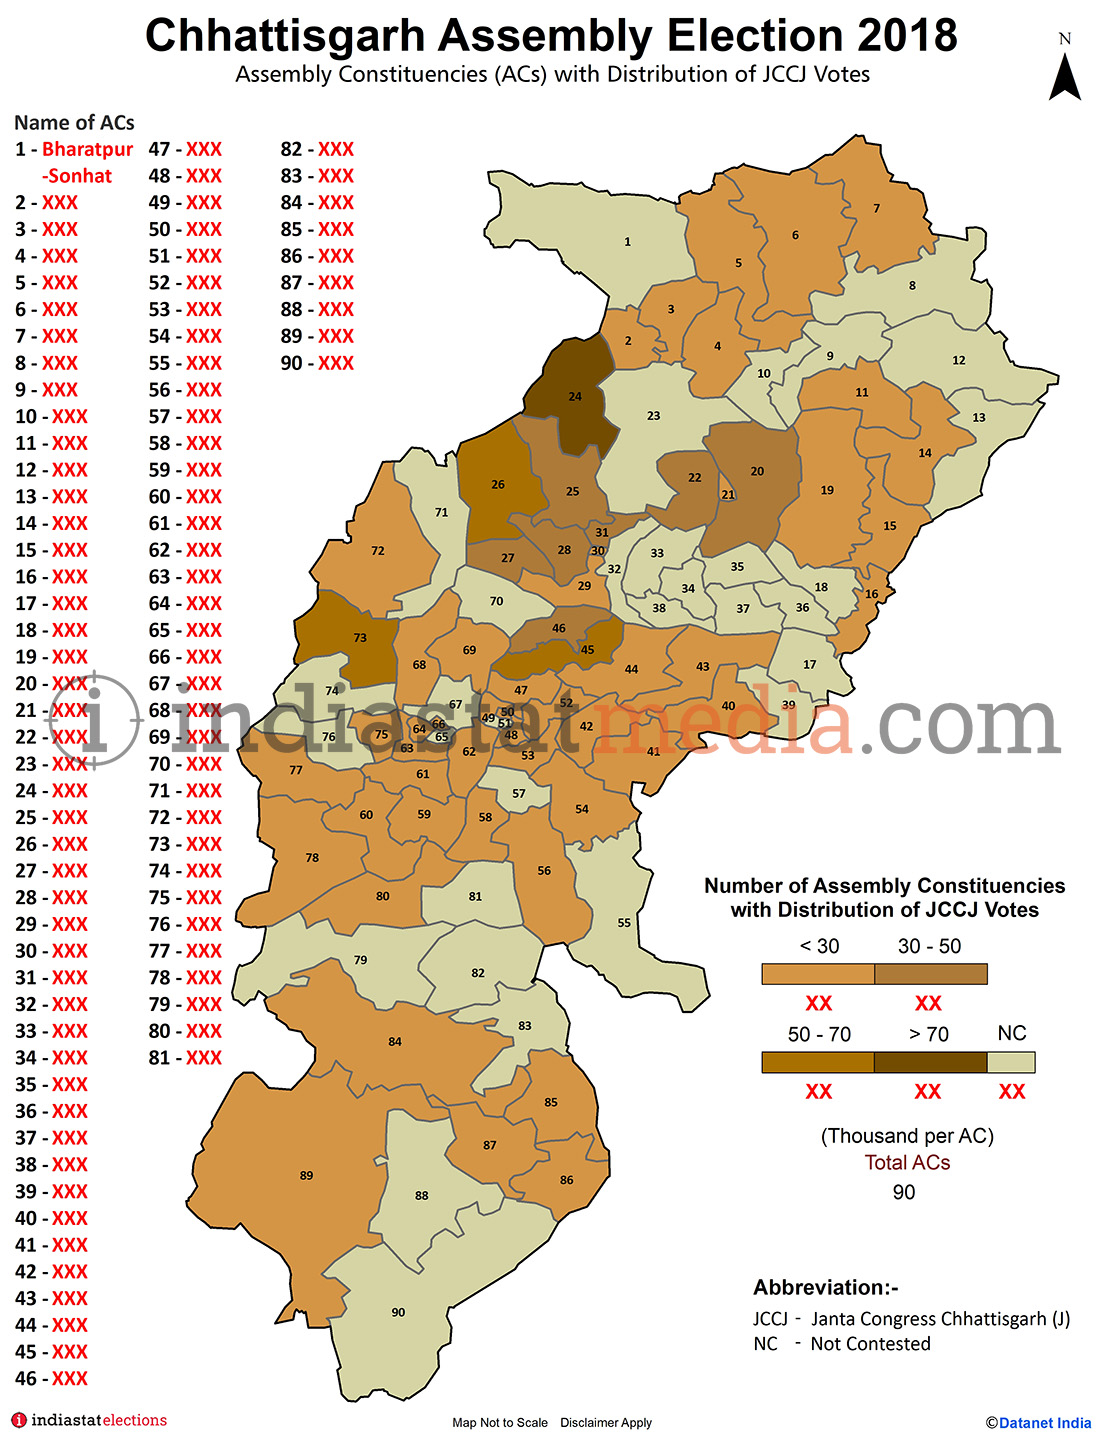 Distribution of JCCJ Votes by Constituencies in Chhattisgarh (Assembly Election - 2018)